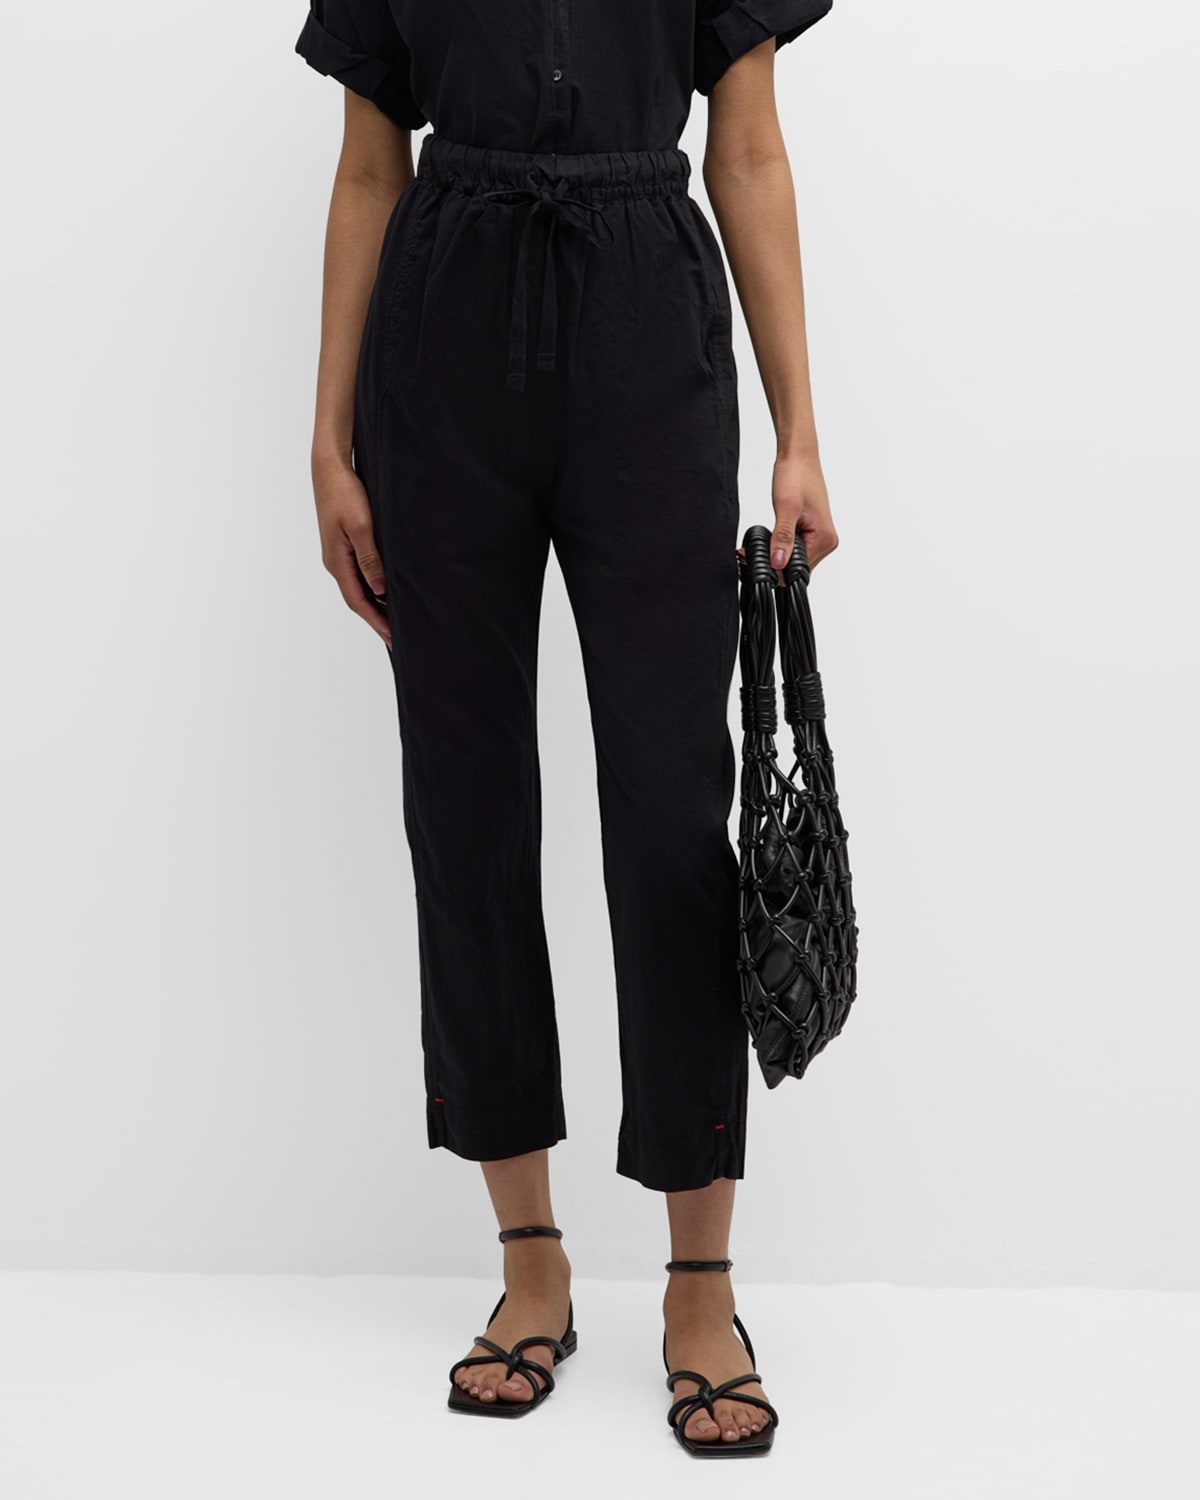 Draper Tapered Cotton Ankle Pants